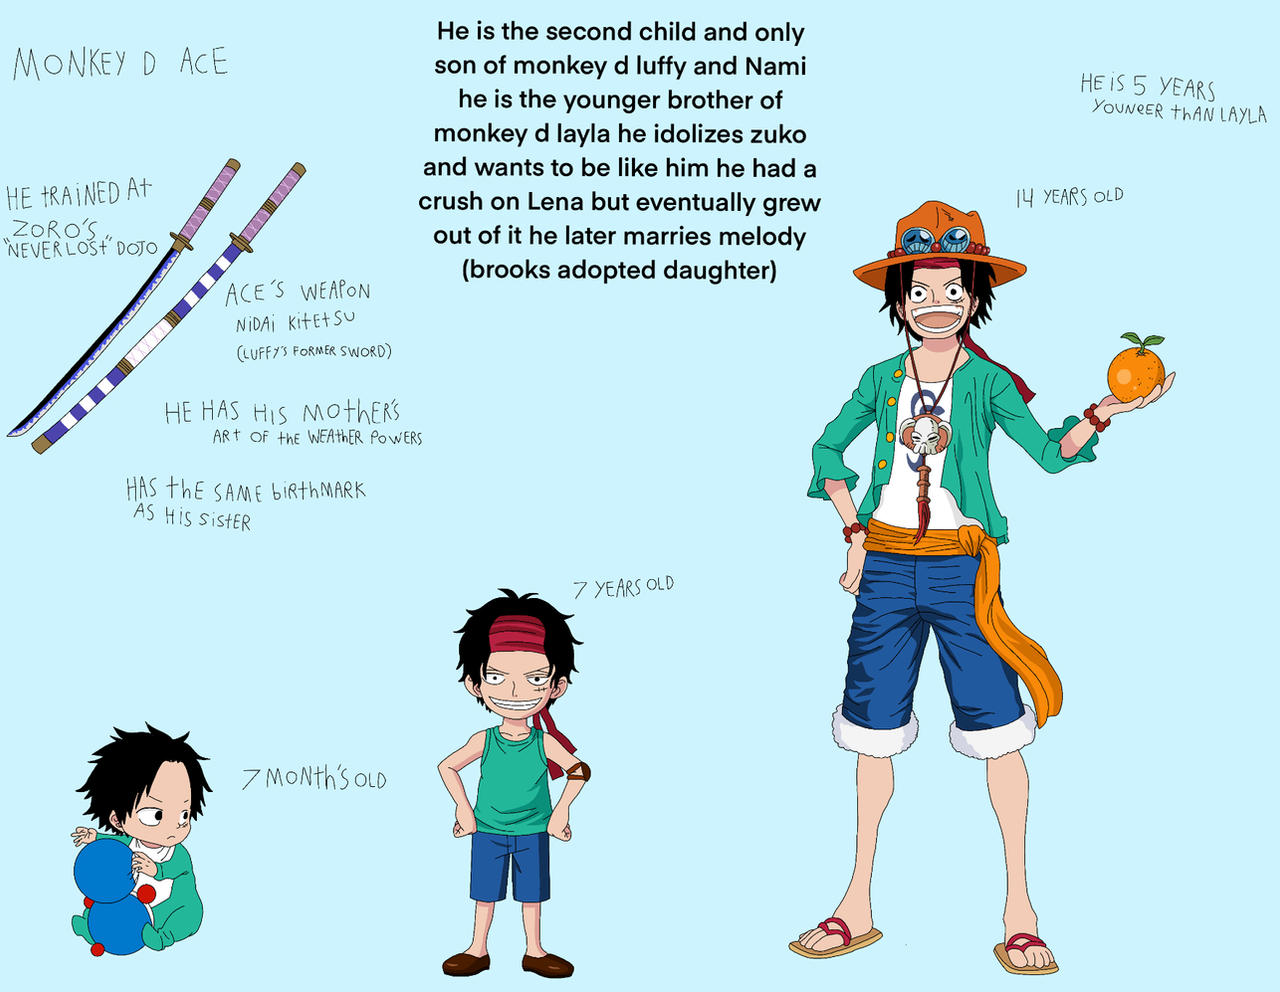 Prince and Piracy (One piece x Male! OC)